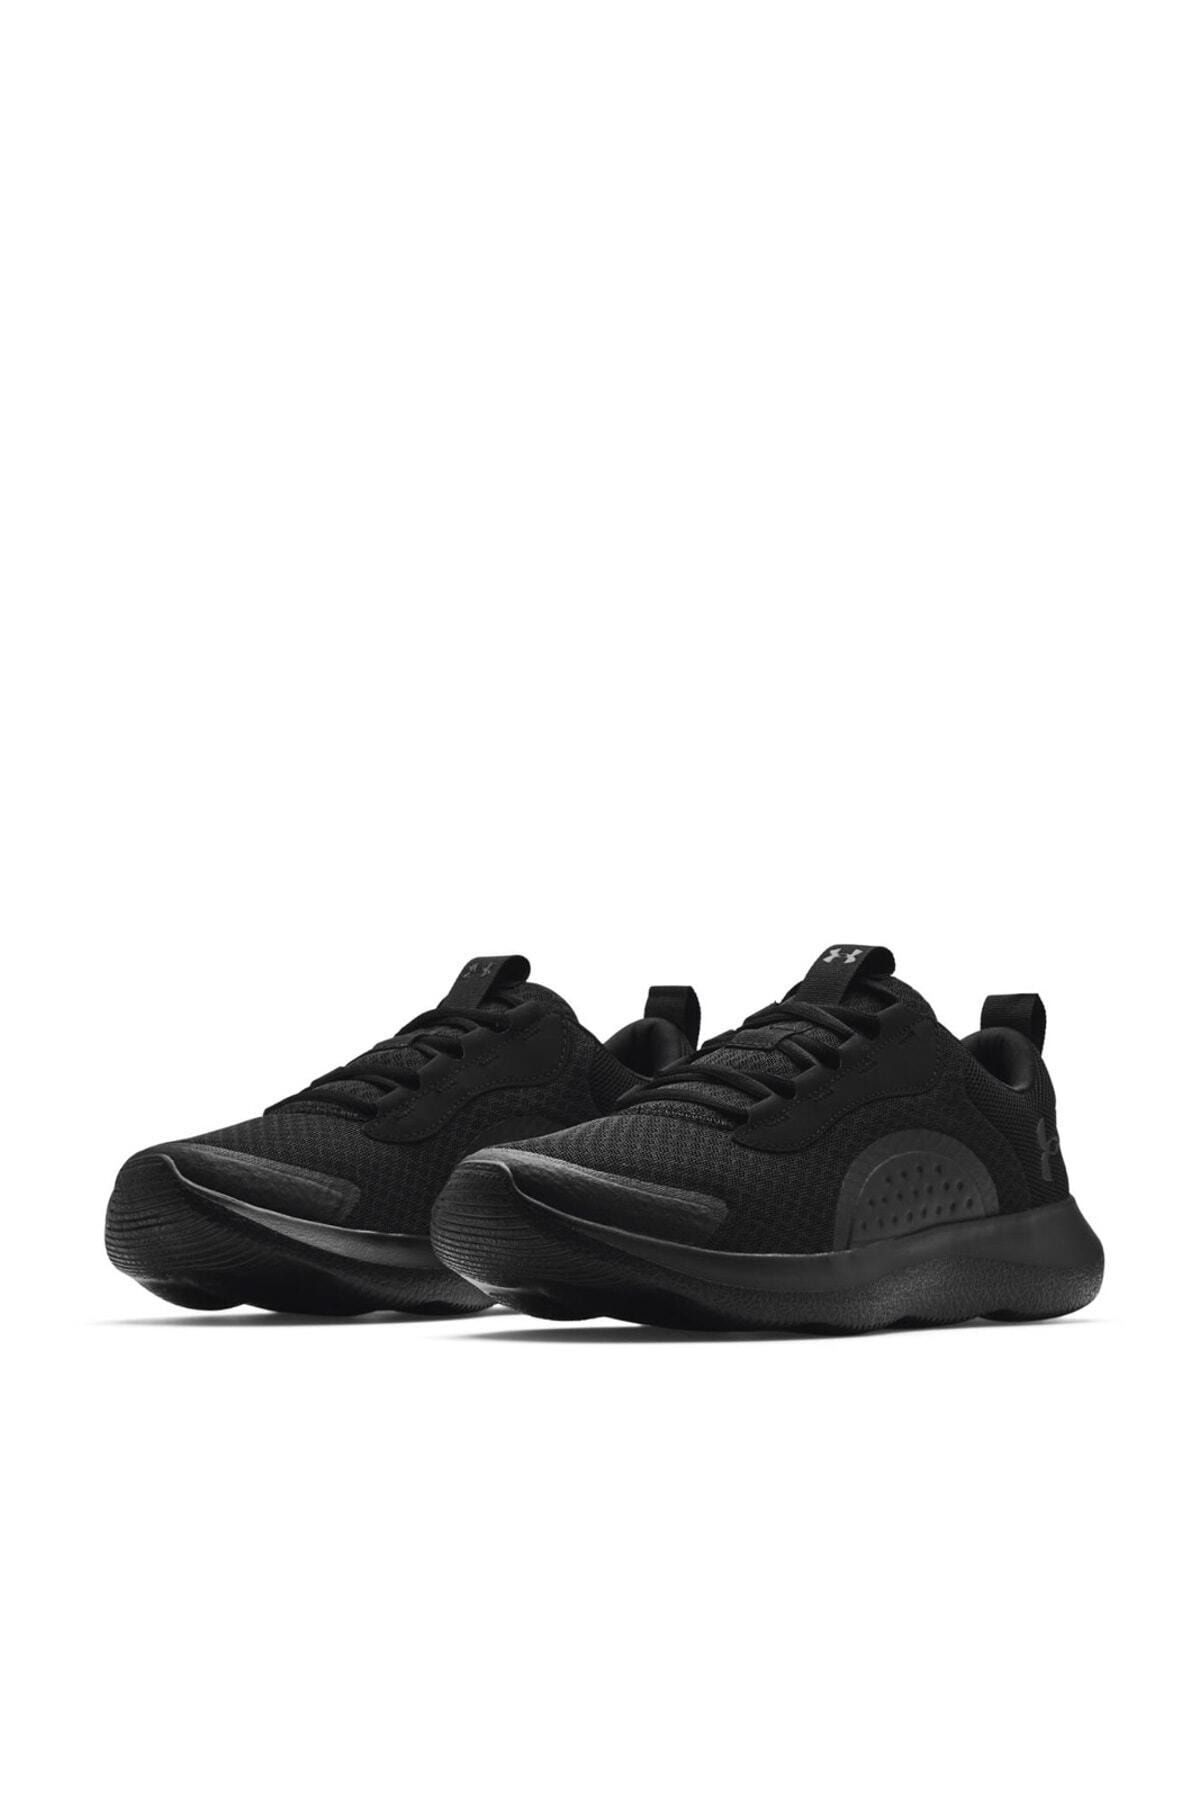 Under Armour UA Victory - 3023639-003